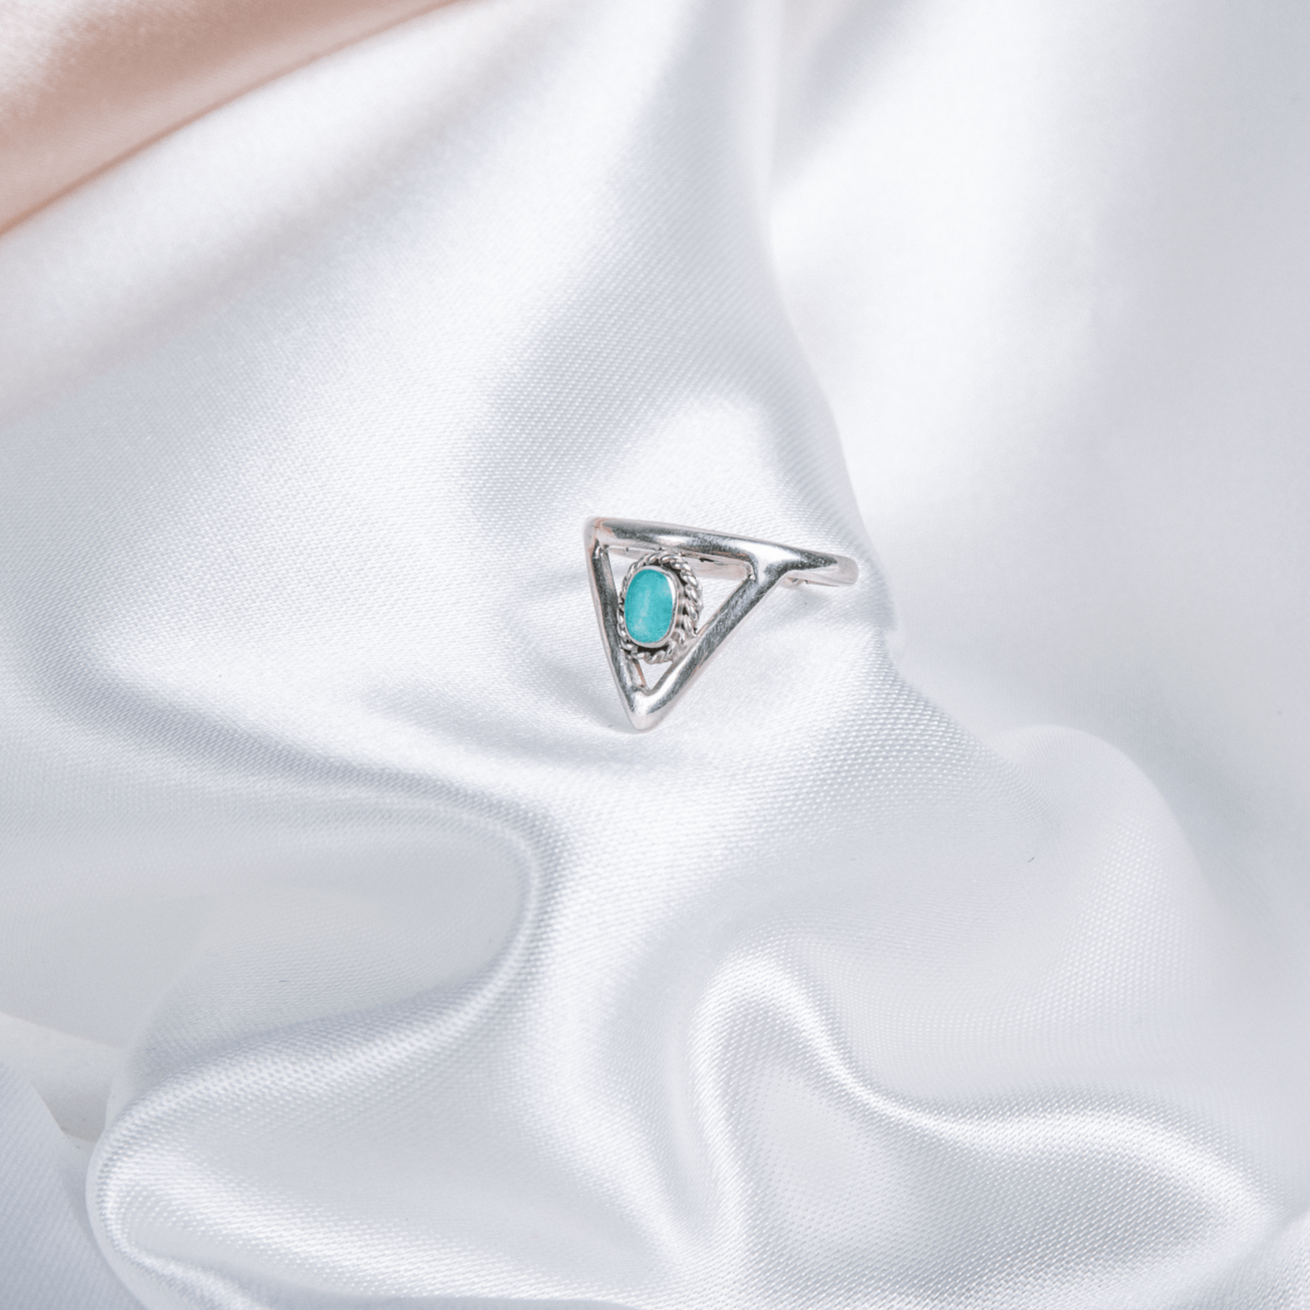 Triangular Amazonite and silver 950 adjustable ring